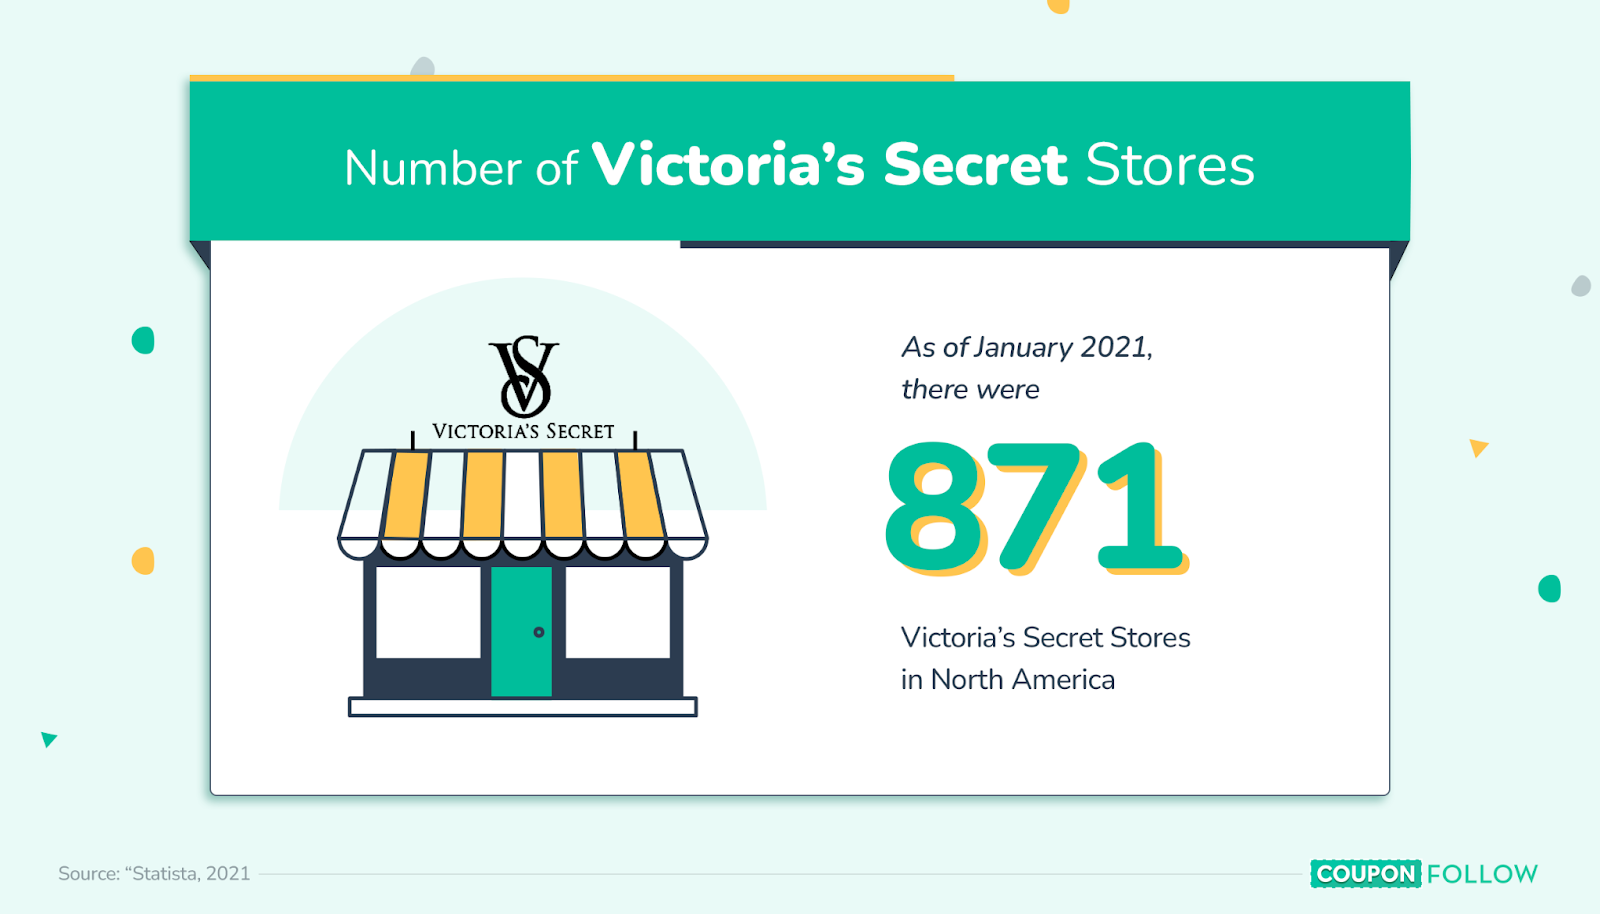 Image showing the number of Victoria’s Secret Stores in North America in 2021